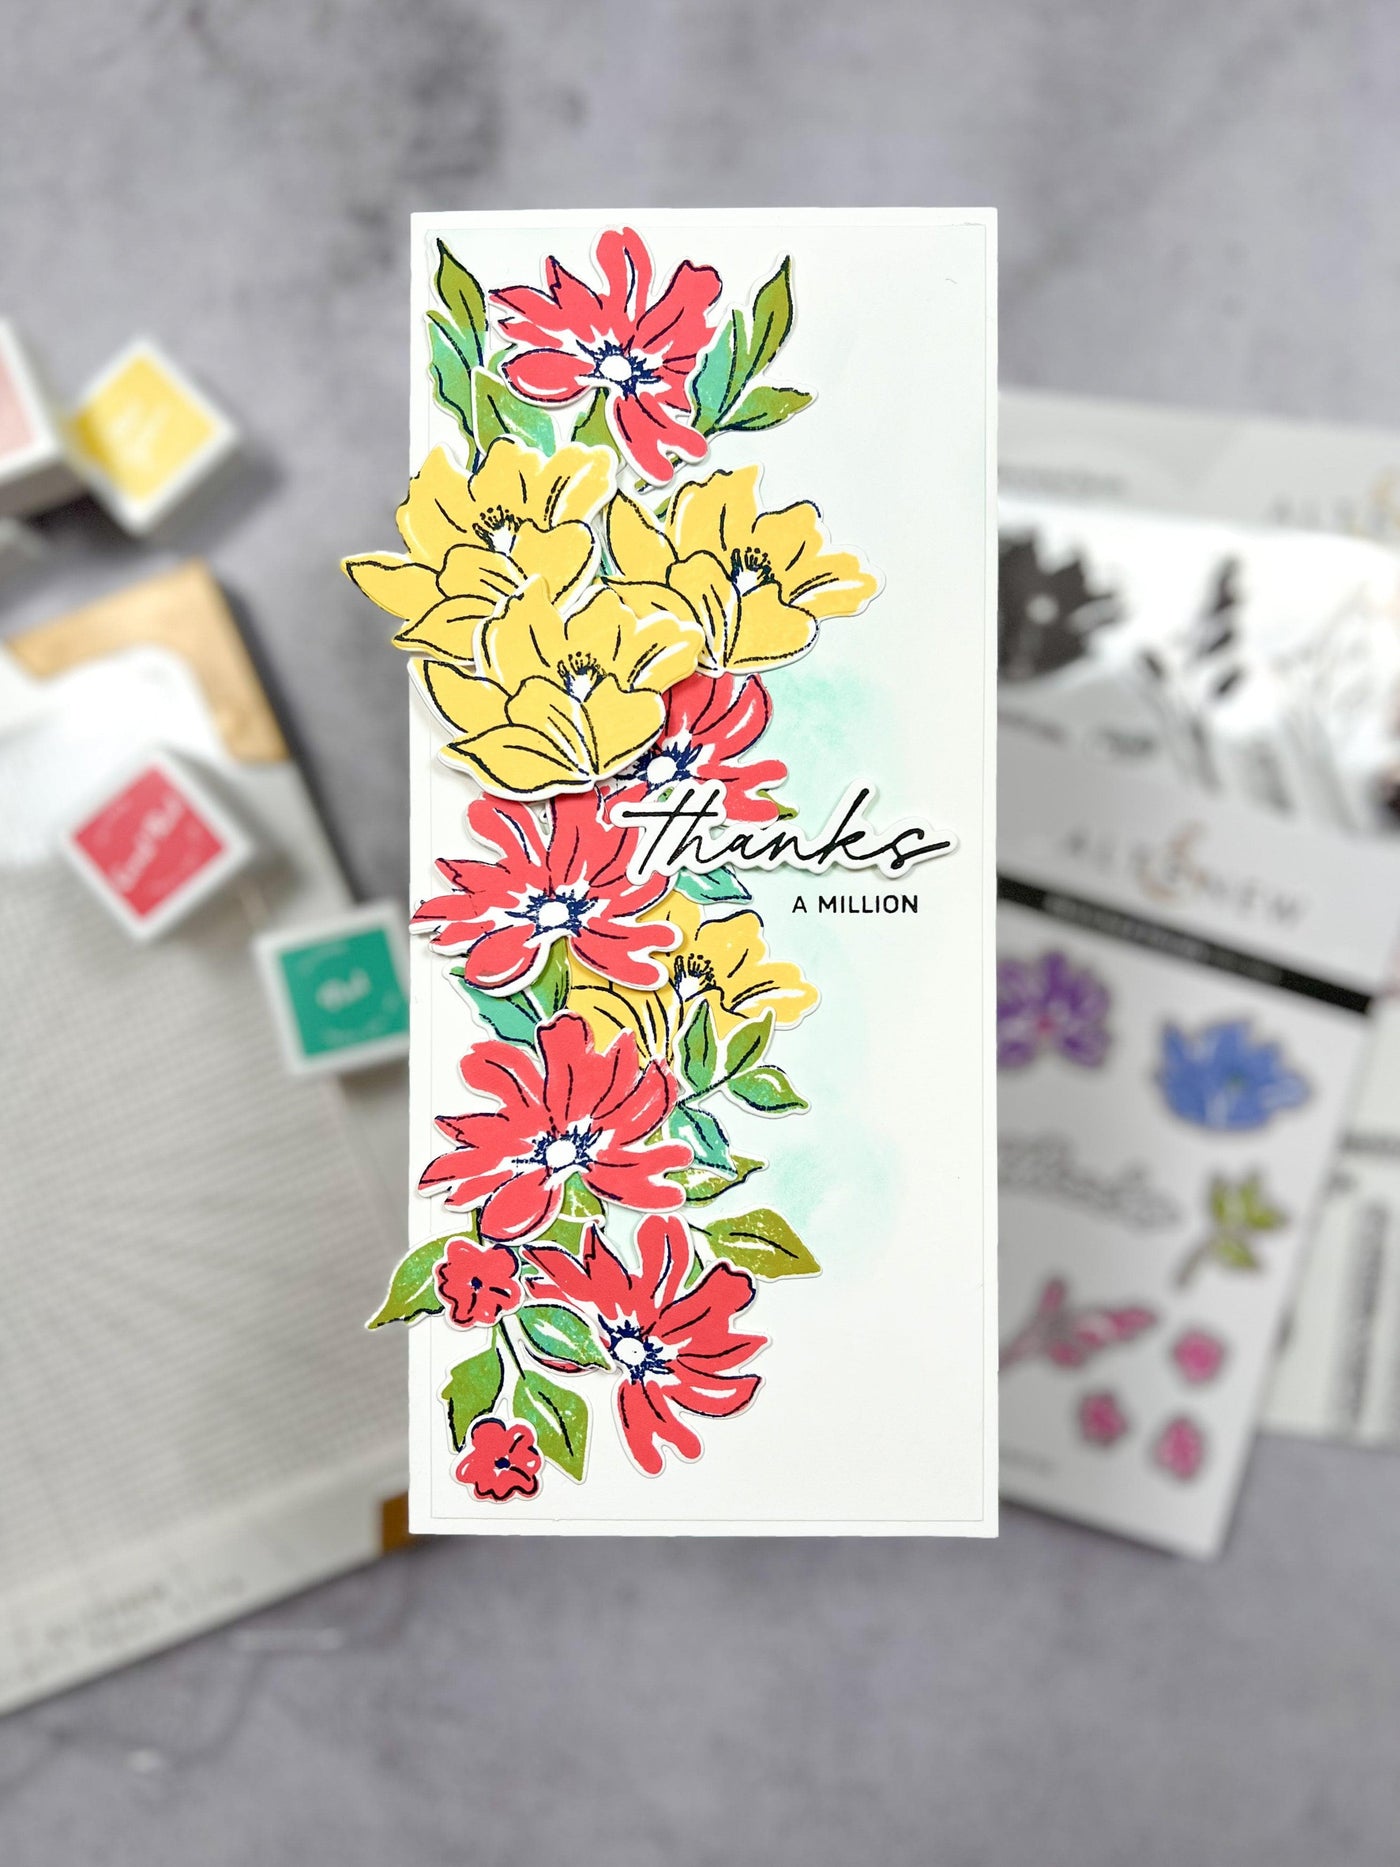 Stamping Starter Kit - Grand Exclusive Class